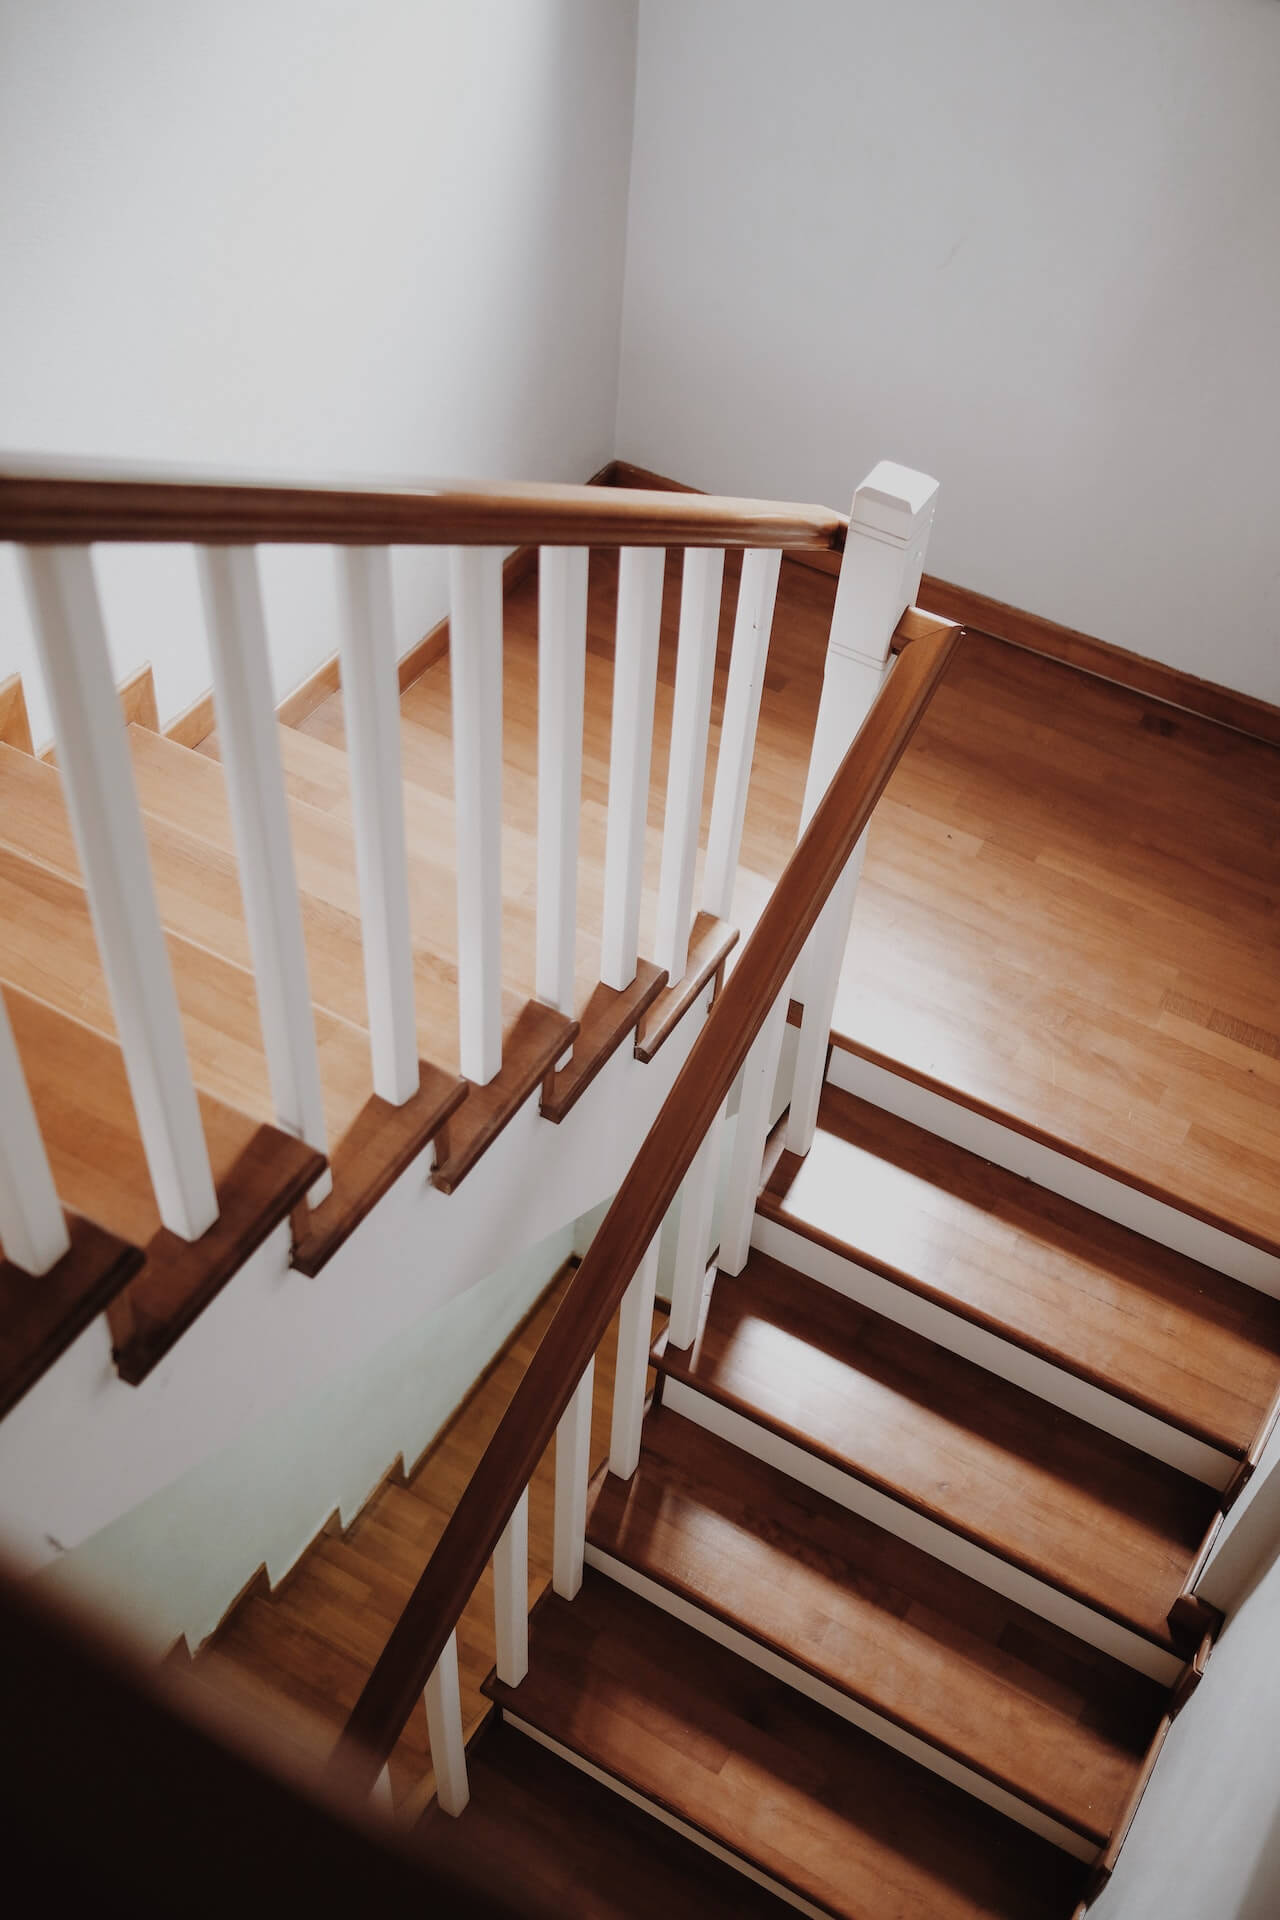 wooden stairs leading upward, wooden steps with white metal railings, simple staircase design